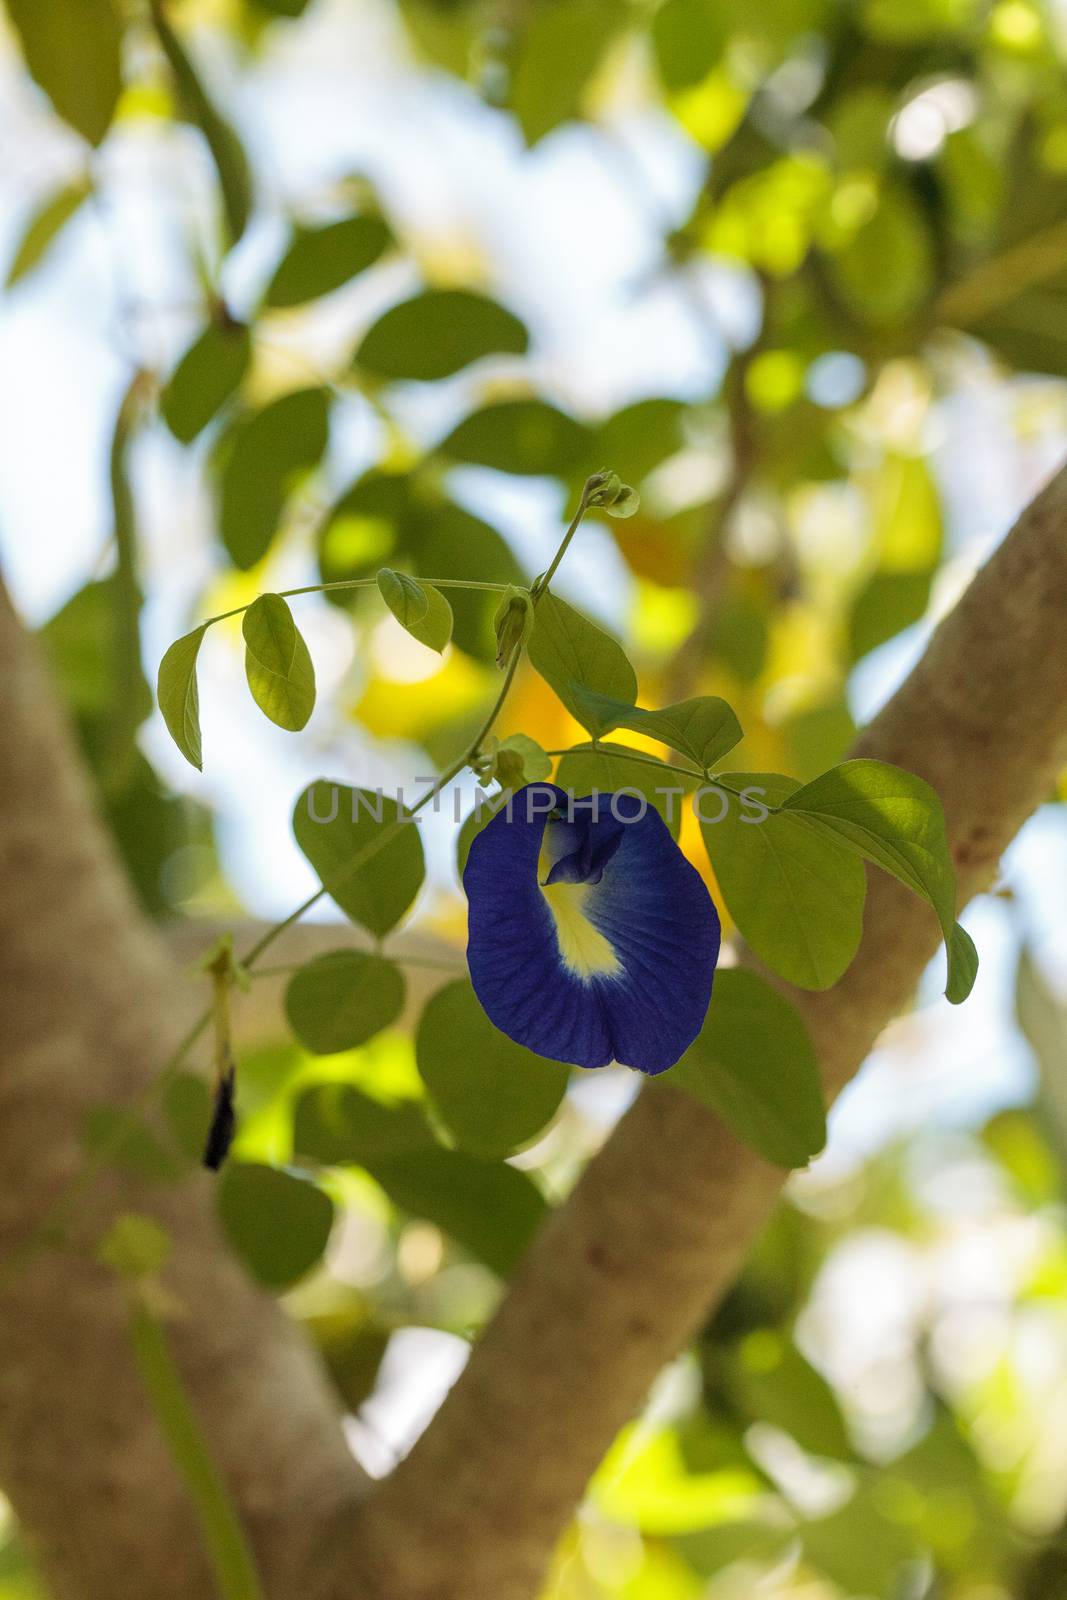 Blue flowers of Krishna’s butter cup Ficus benghalensis var. krishnae blooms on a tree in Naples, Florida